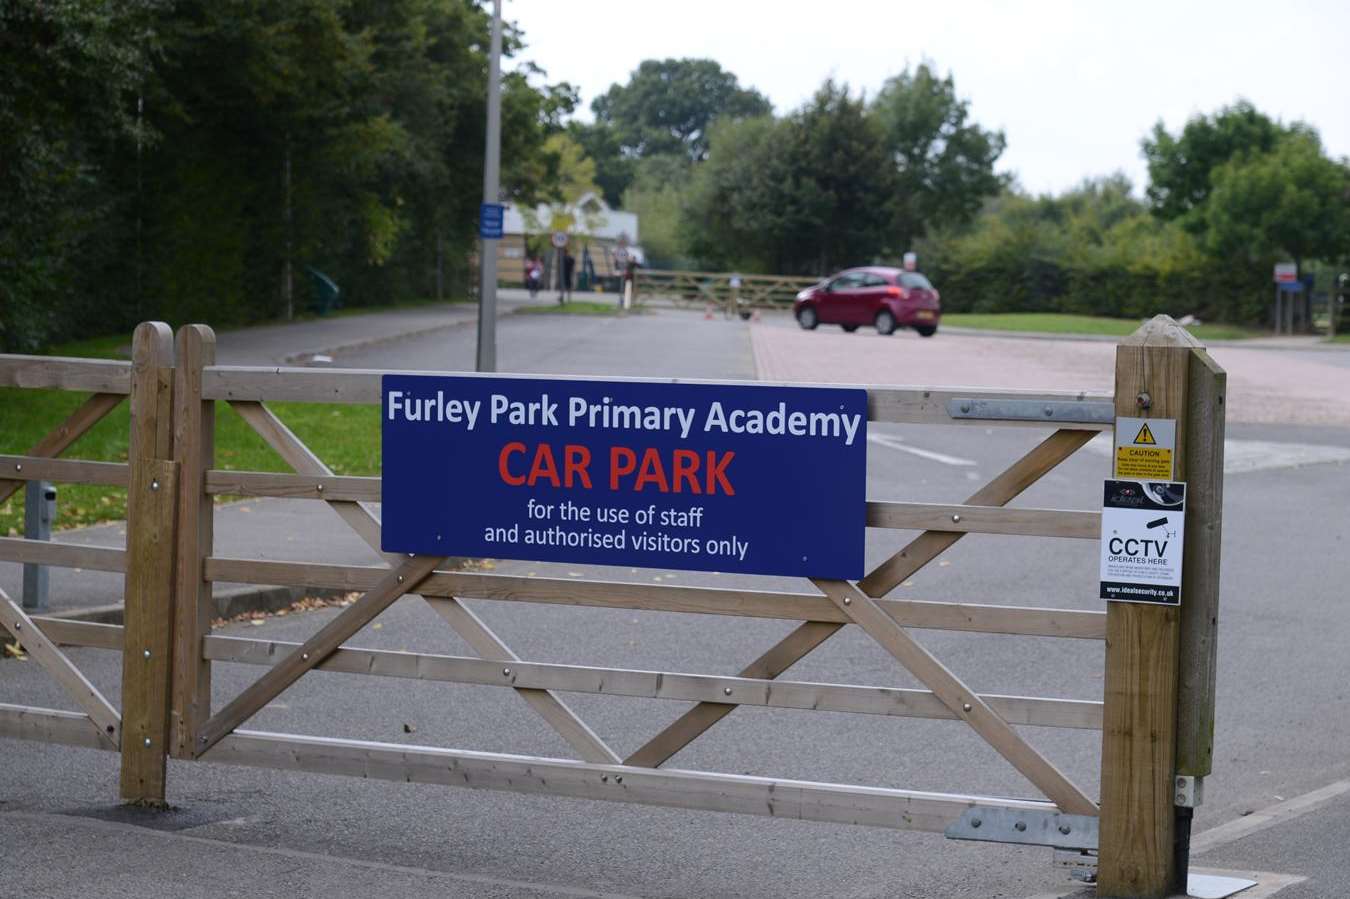 The gates were closed to pupils this morning